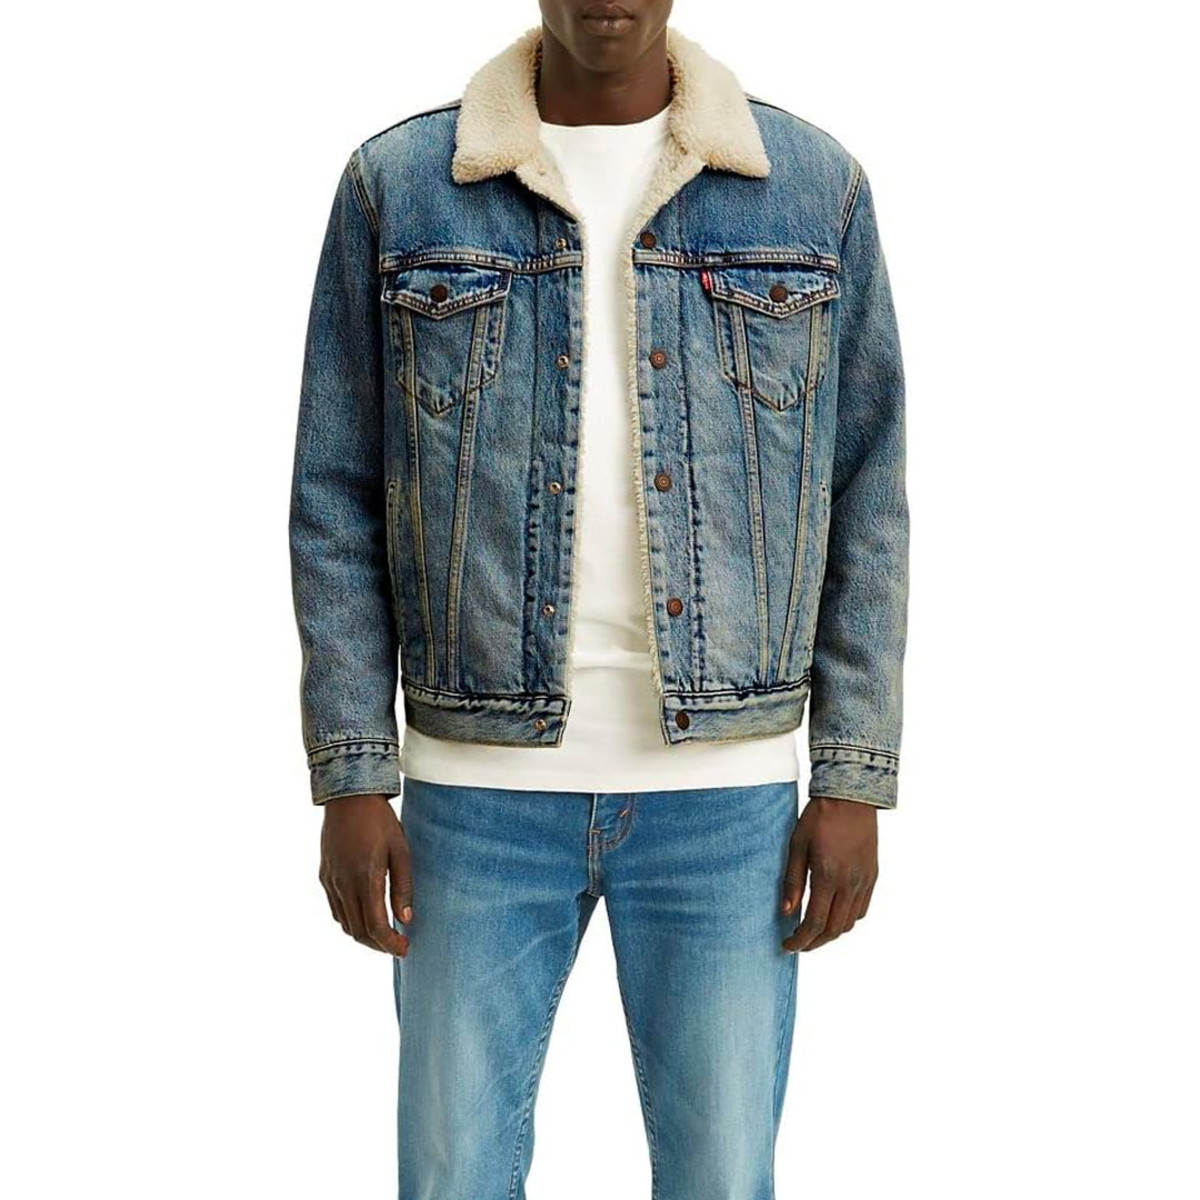 The Levi's Sherpa Trucker Jacket Is on Sale Starting at $61